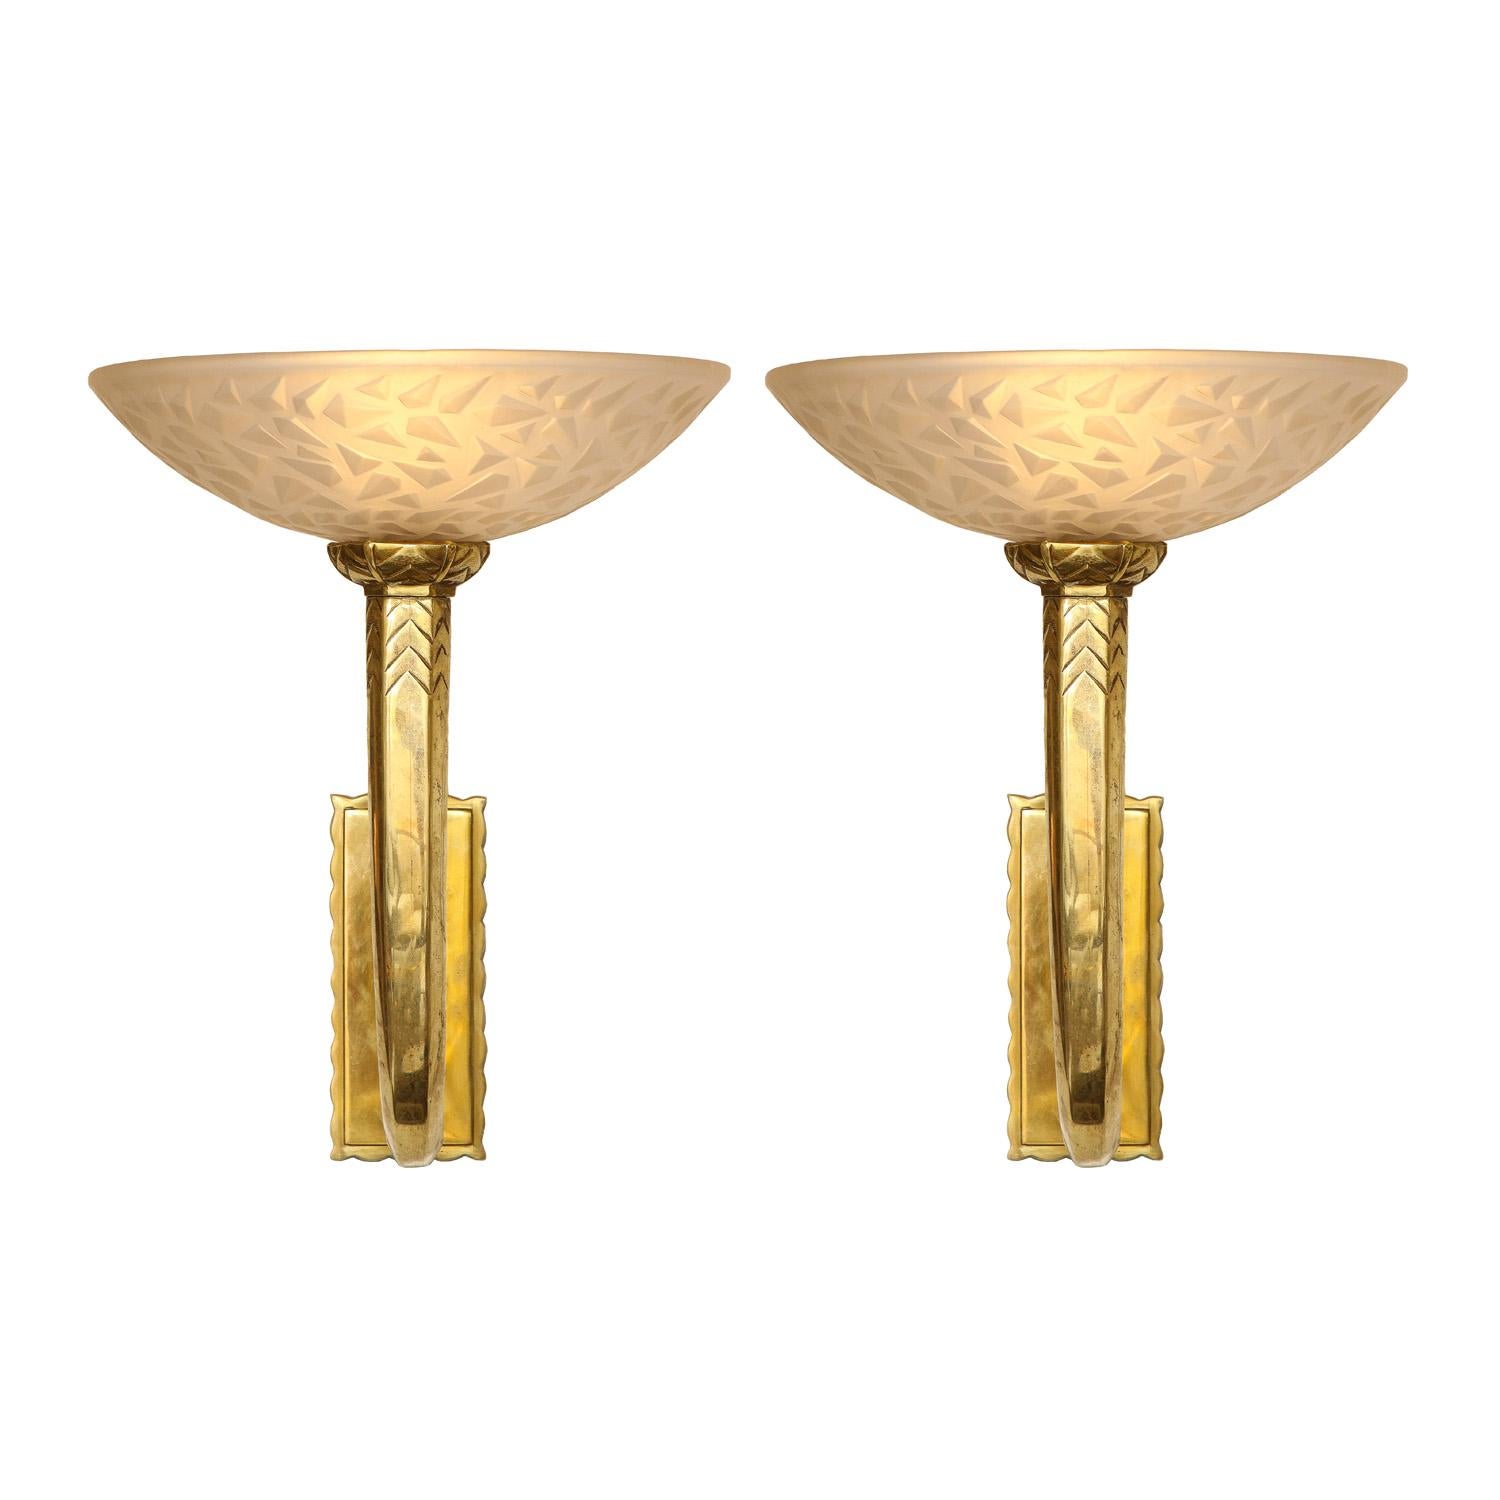 Deco period pair of bronze wall sconces with etched, frosted glass bowl and chevron incised body.
Dimensions:

Width: 11 inches
Depth: 12 inches
Height: 12 inches

Back Plate: 
Width: 3 inches
Height: 6.75 inches

